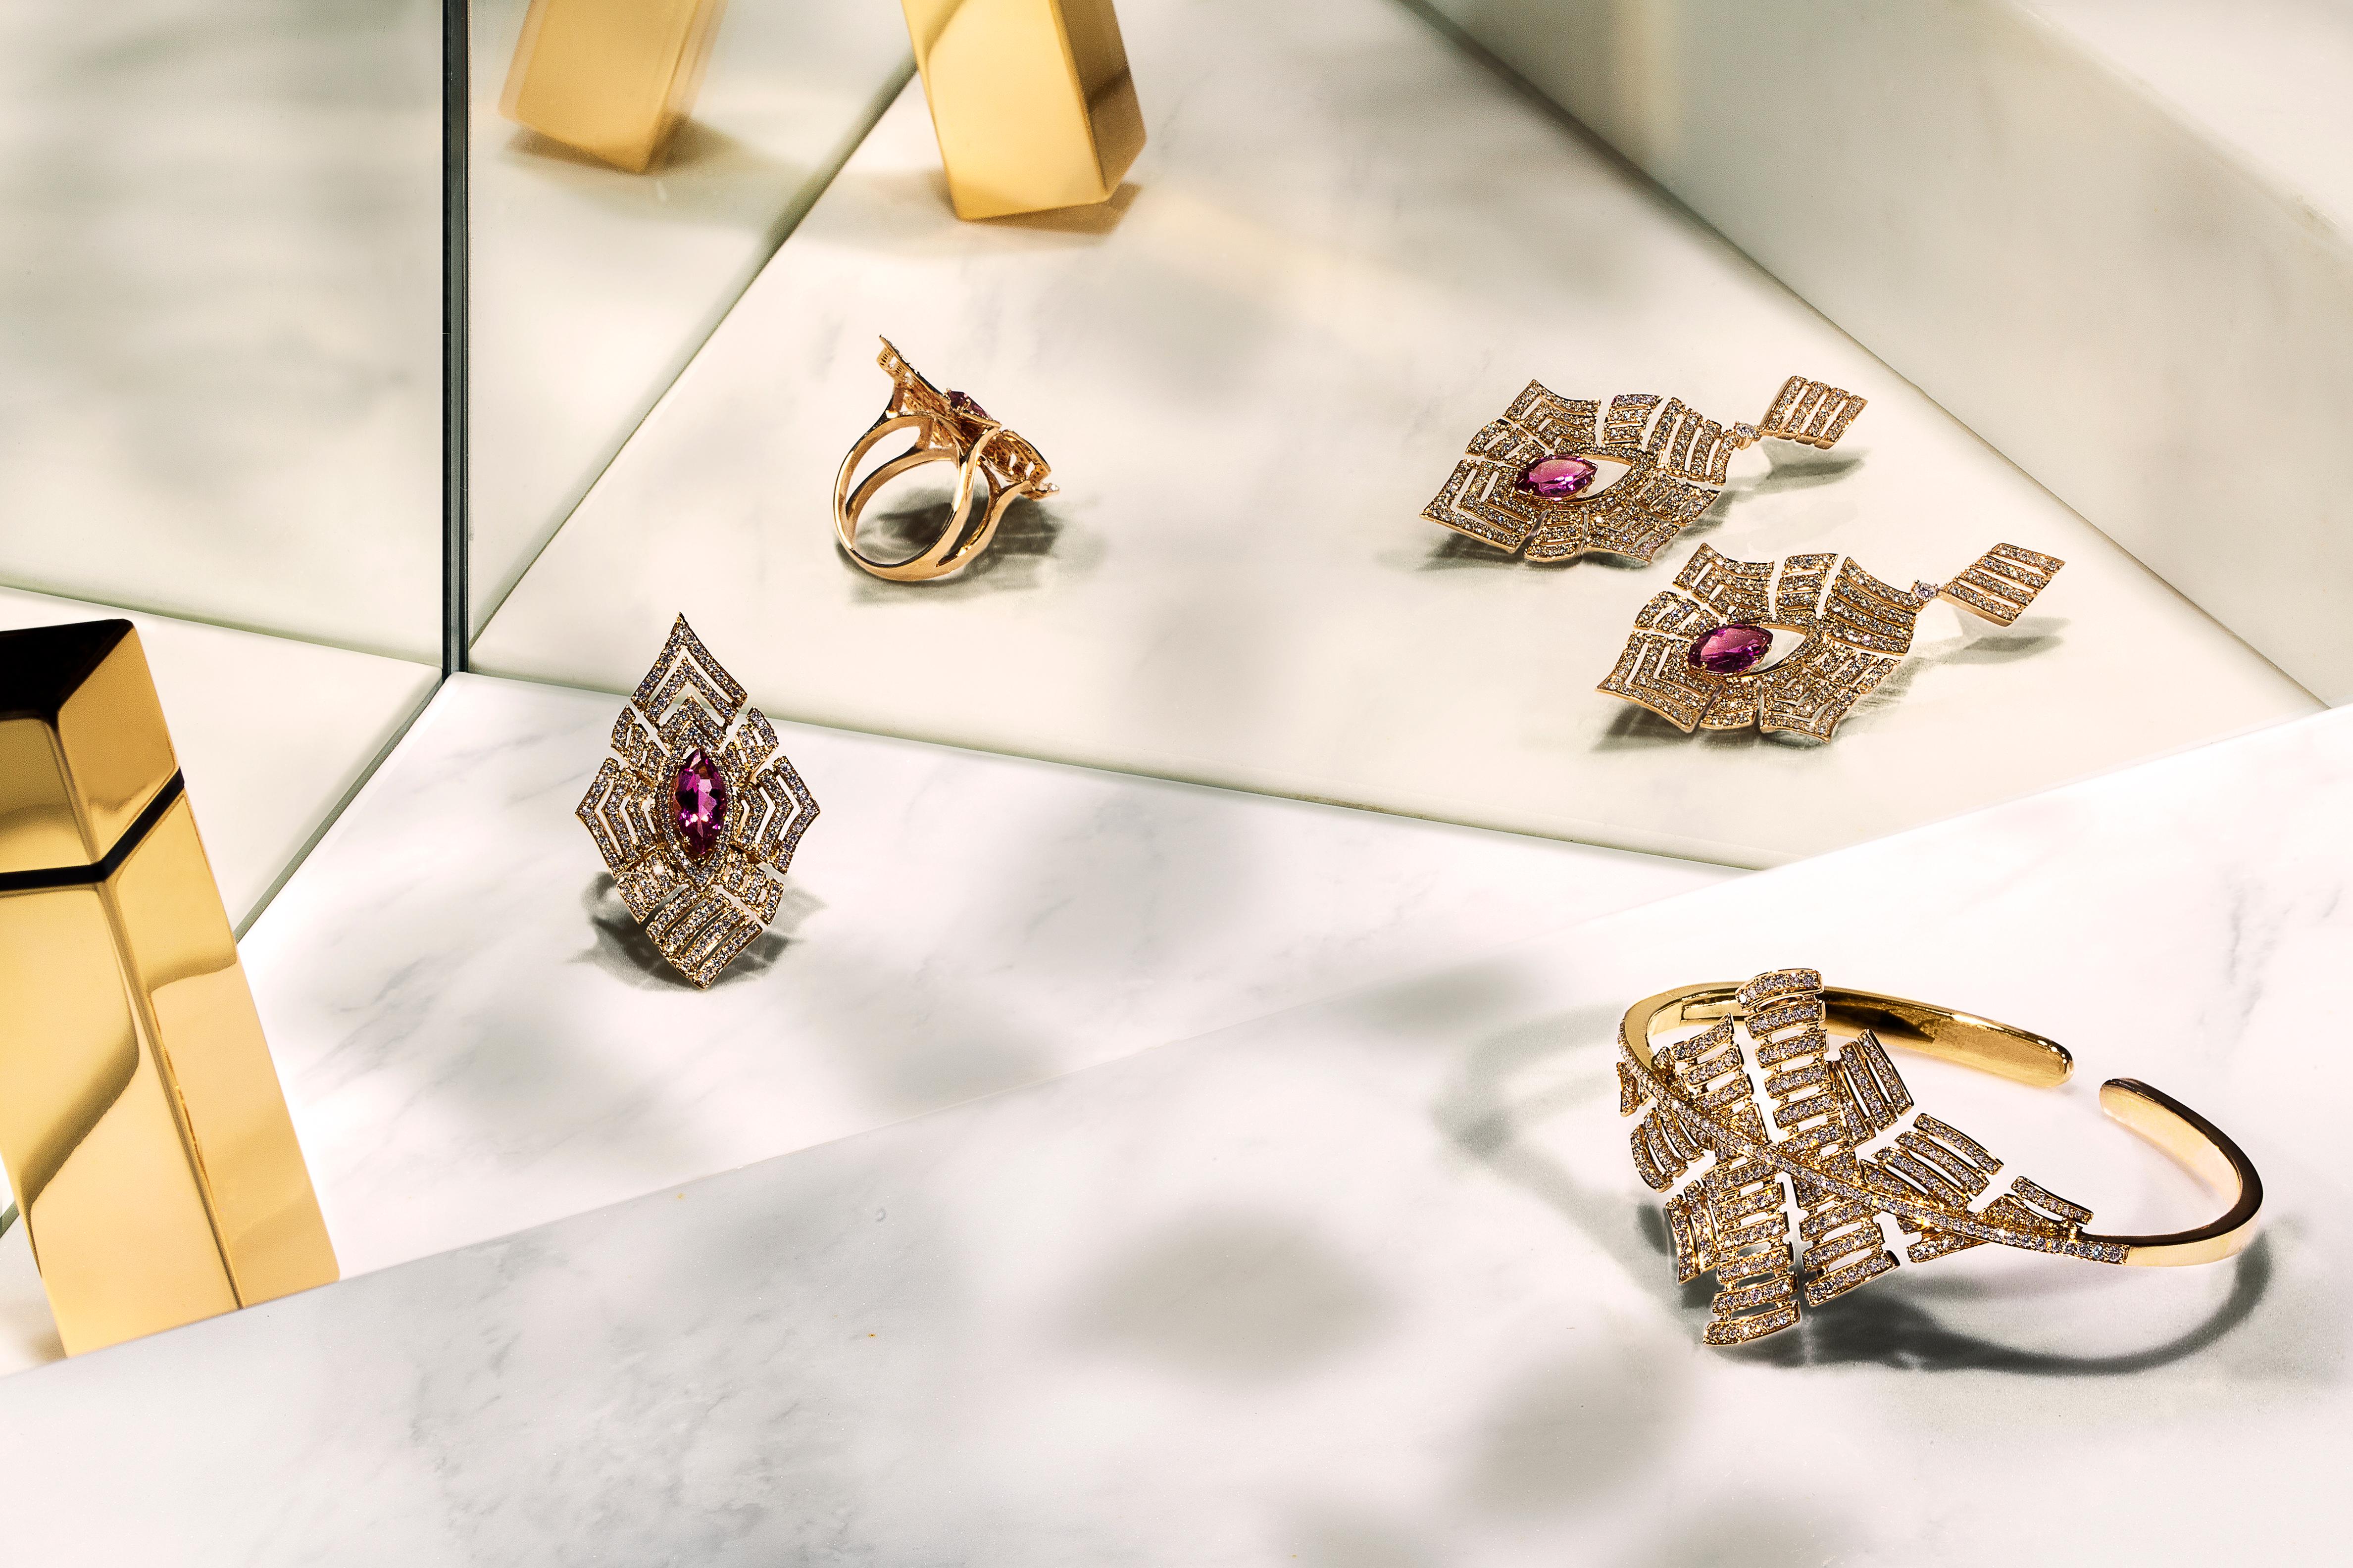 Inspired by the mesmerizing garden mazes of the Renaissance period, the Labyrinth Collection intertwines precious gemstones with diamonds, set in 18k gold